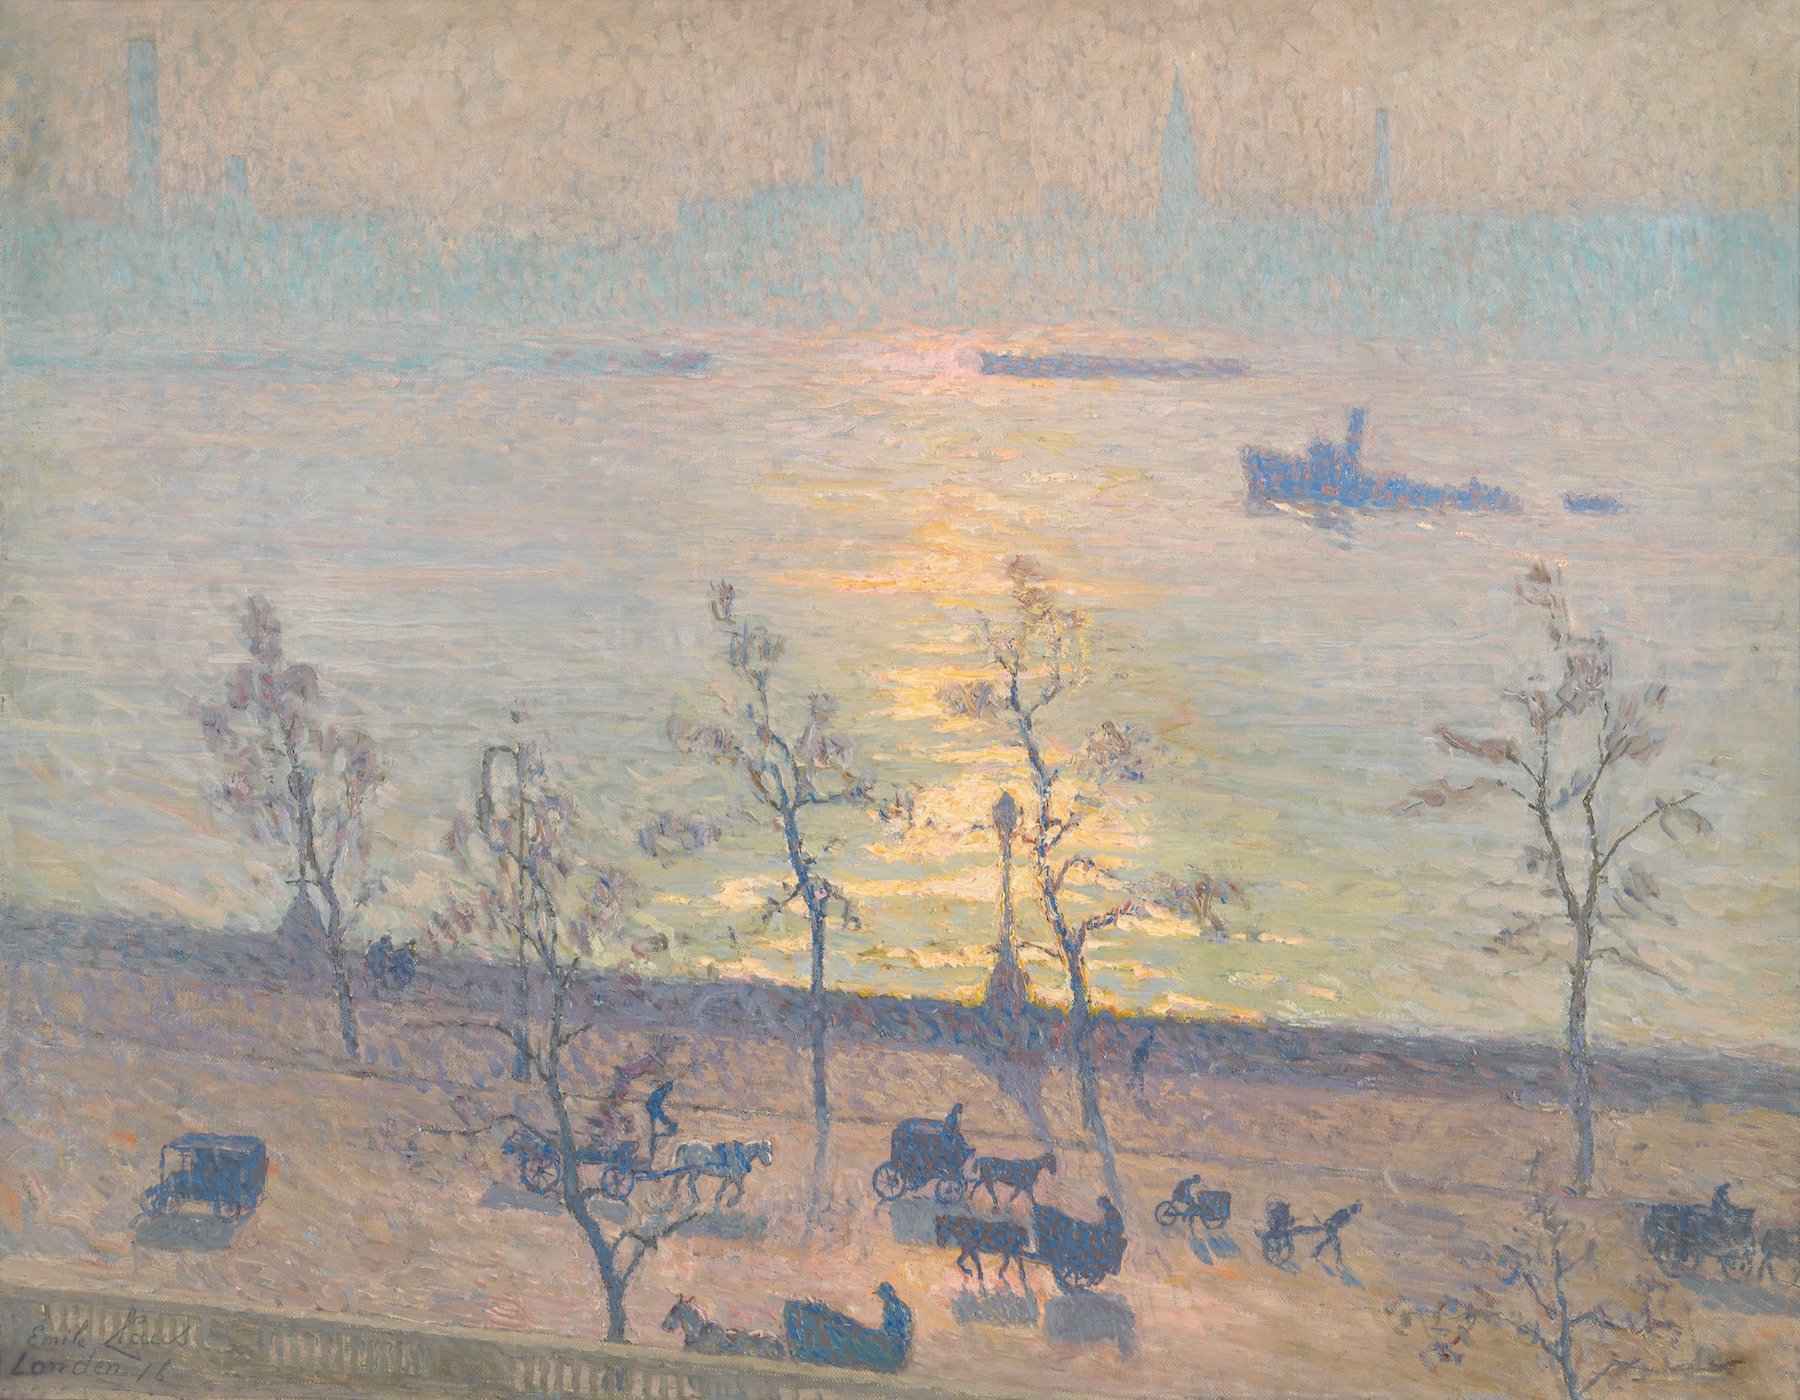 Sunset over the Thames, London by Emile Claus - 1916 - 71 x 92 cm The Royal Museums of Fine Arts of Belgium